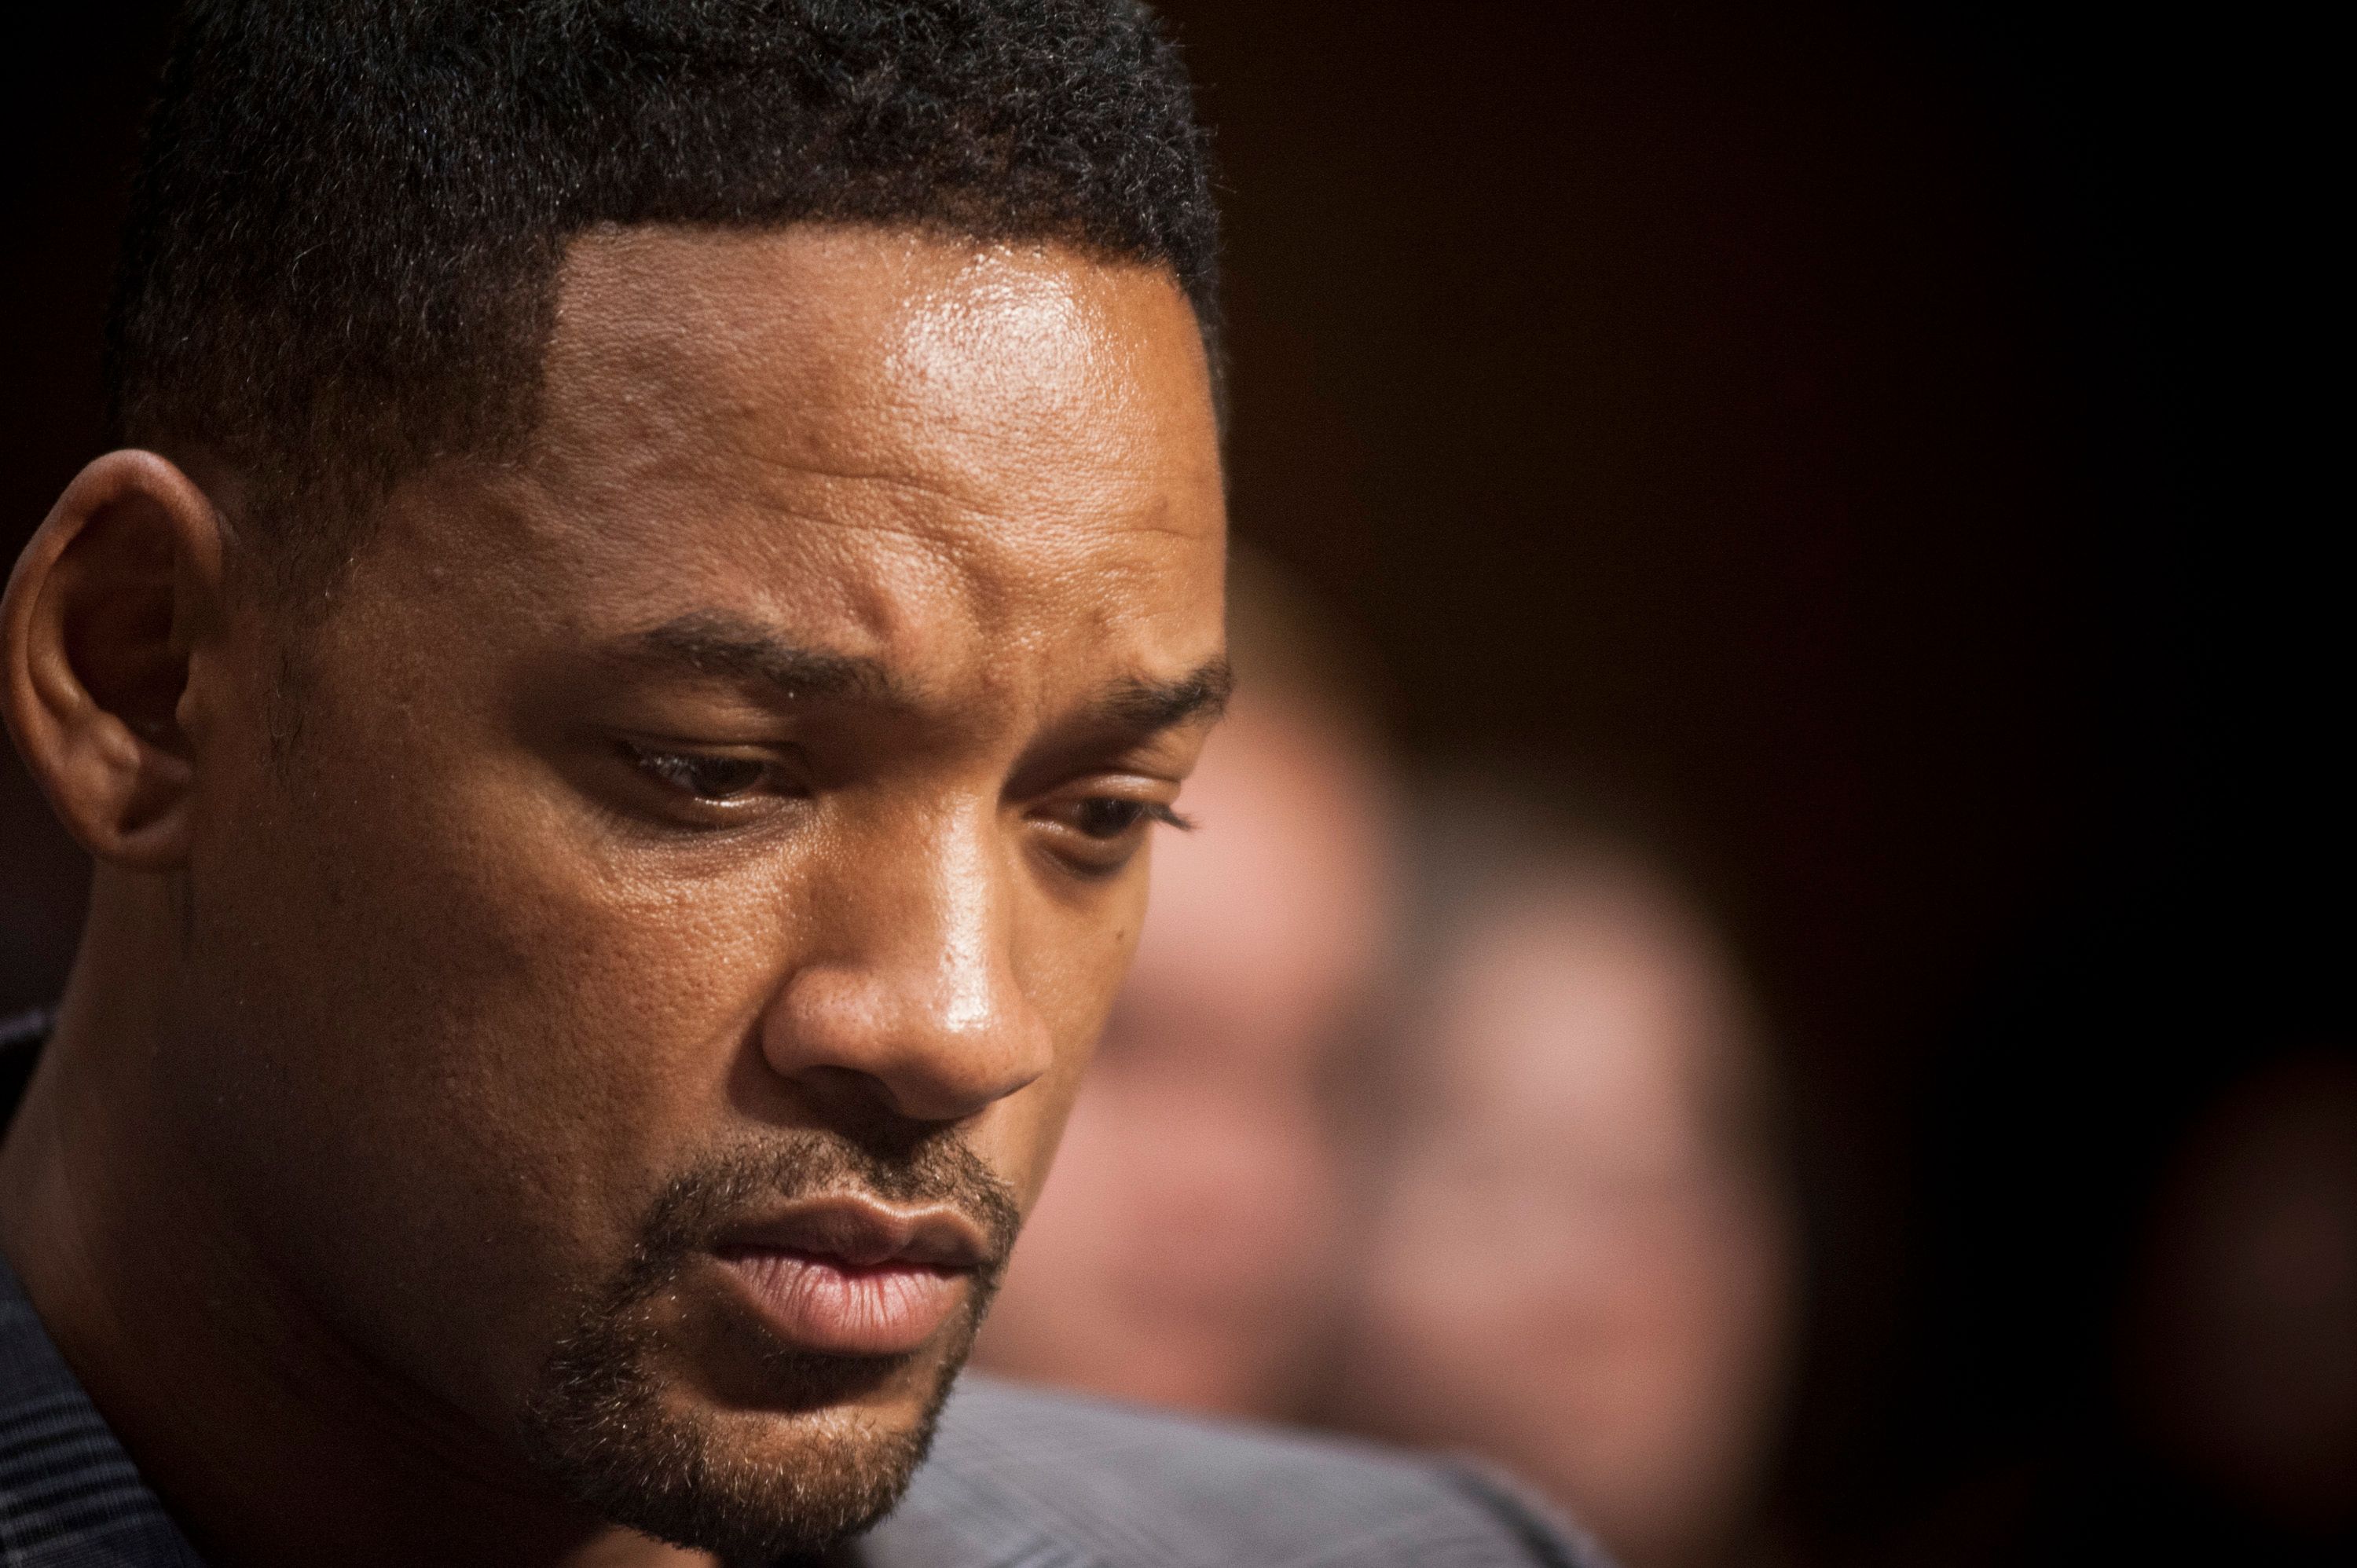 Will Smith during the "The Next Ten Years In The Fight Against Human Trafficking: Attacking The Problem With The Right Tools" committee hearing at the Hart Senate Office Building on July 17, 2012 in Washington, DC. | Source: Getty Images